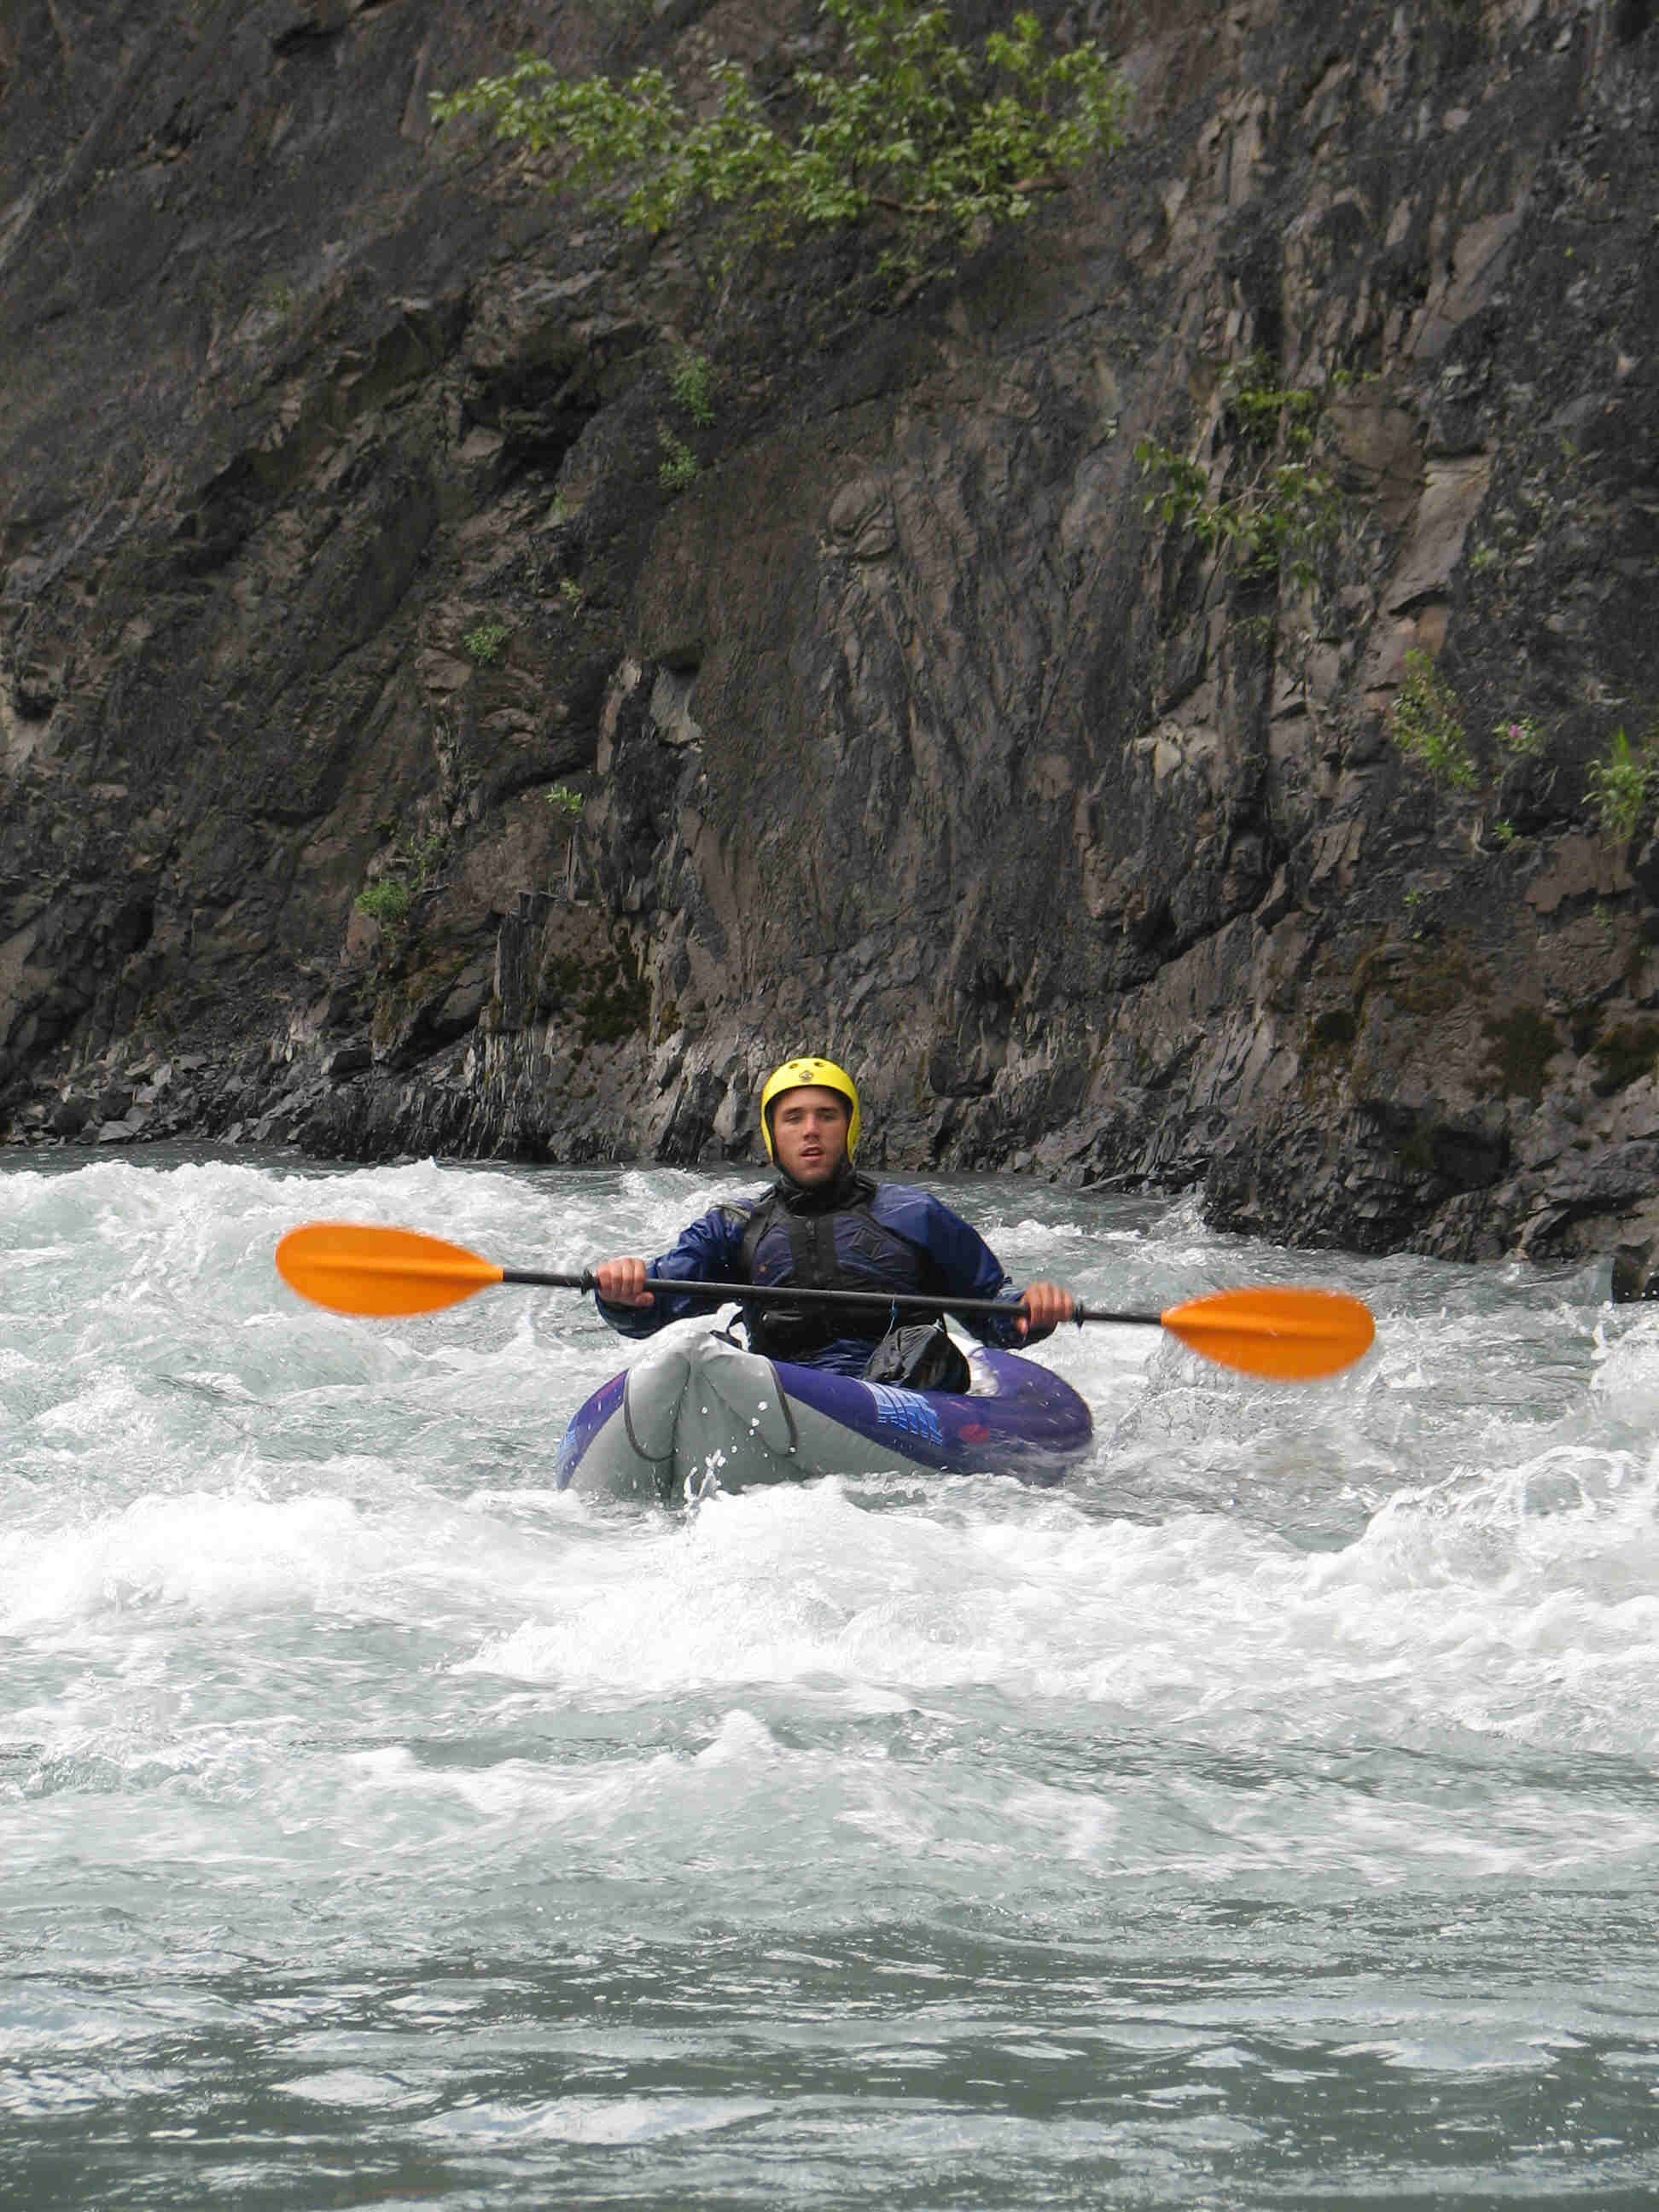 Whitewater Kayaking with Raft Support on Happy River - AIRE LYNX 1 - ALASKA RAFT CONNECTION